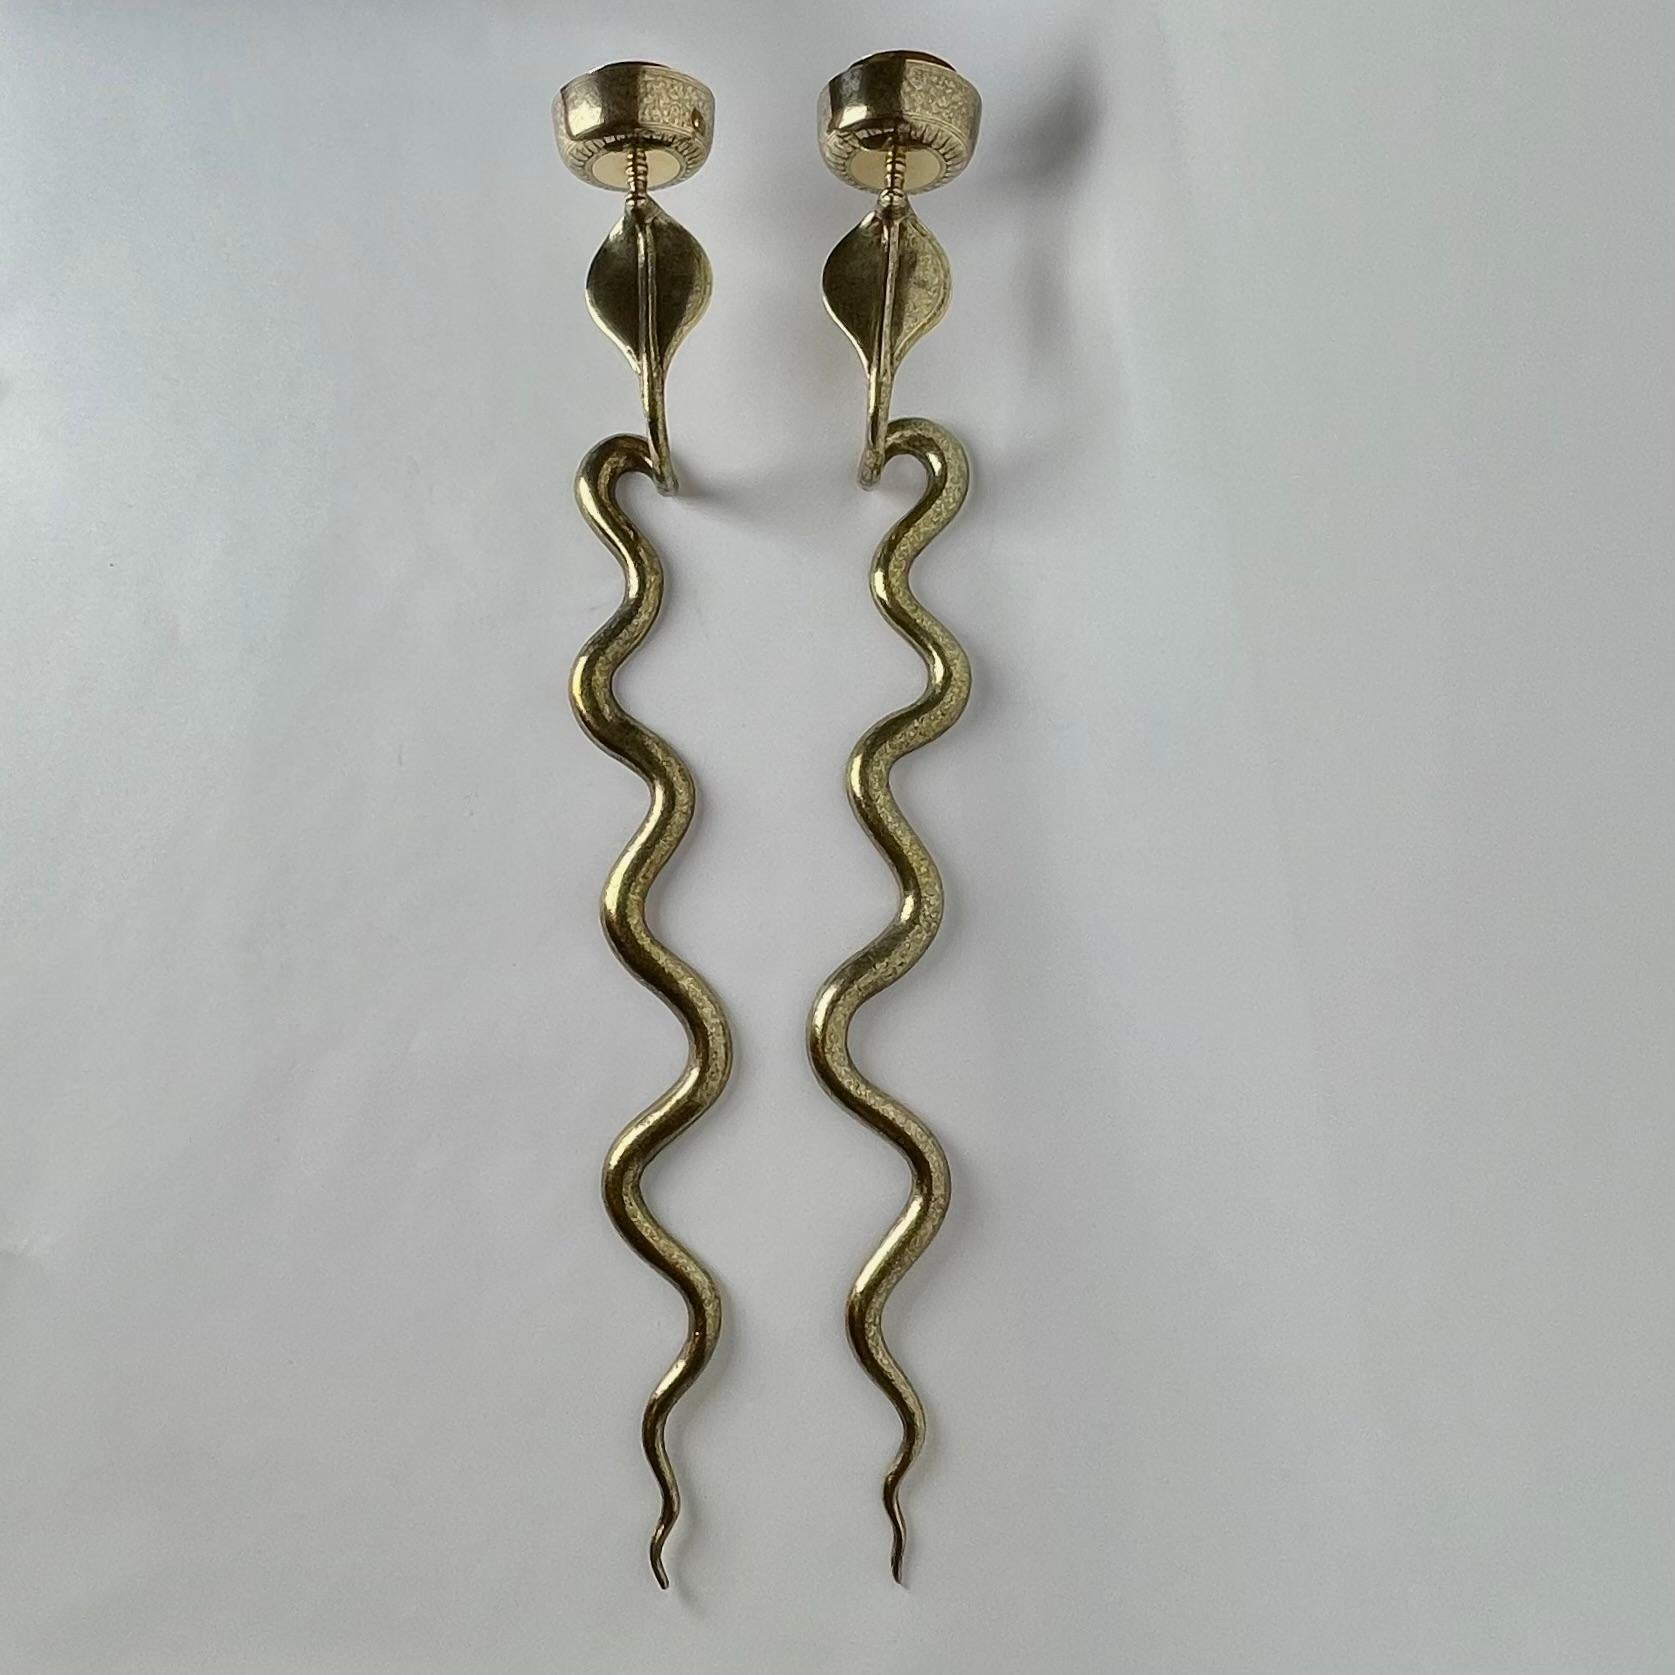 A large pair of Wall Lights in the shape of a Cobra. Art Deco, 1920s-1930s. Scary but cool. Elegantly decorated in brass.

Wear consistent with age and use.